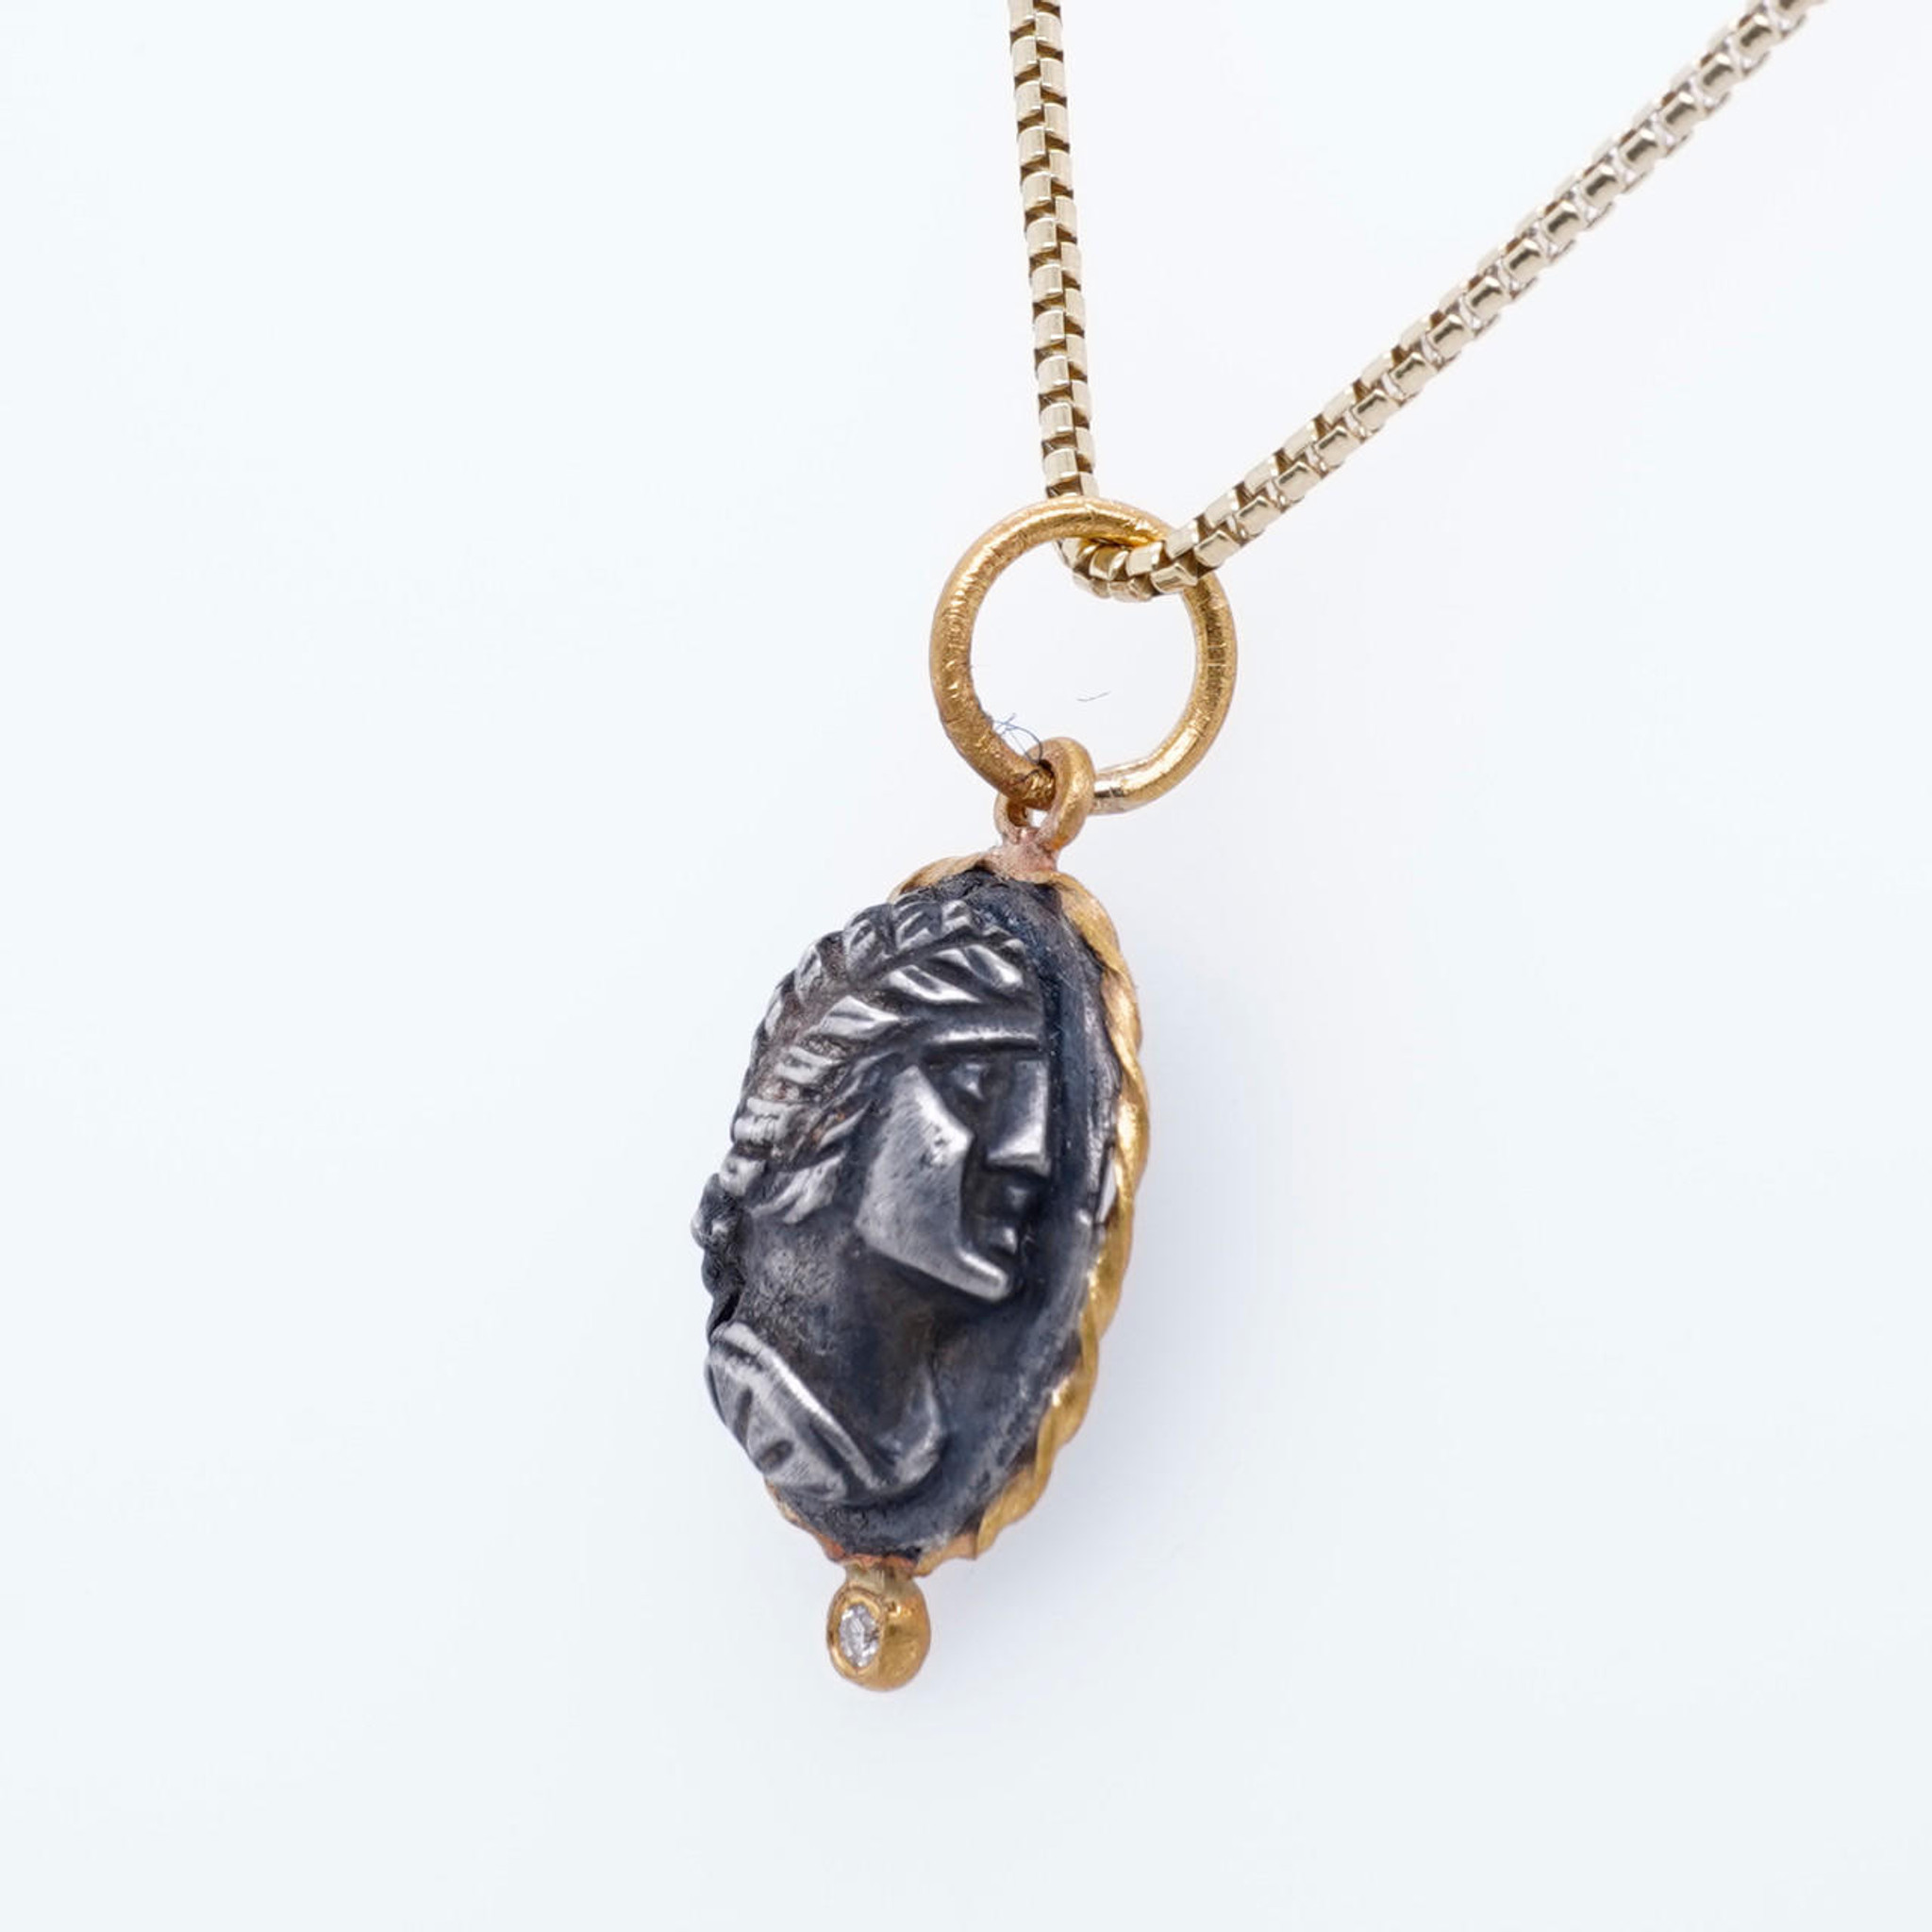 Water Nymph, Pendant Necklace Charm Coin Amulet with Diamond, 24kt Gold and Silver by Prehistoric Works of Istanbul, Turkey